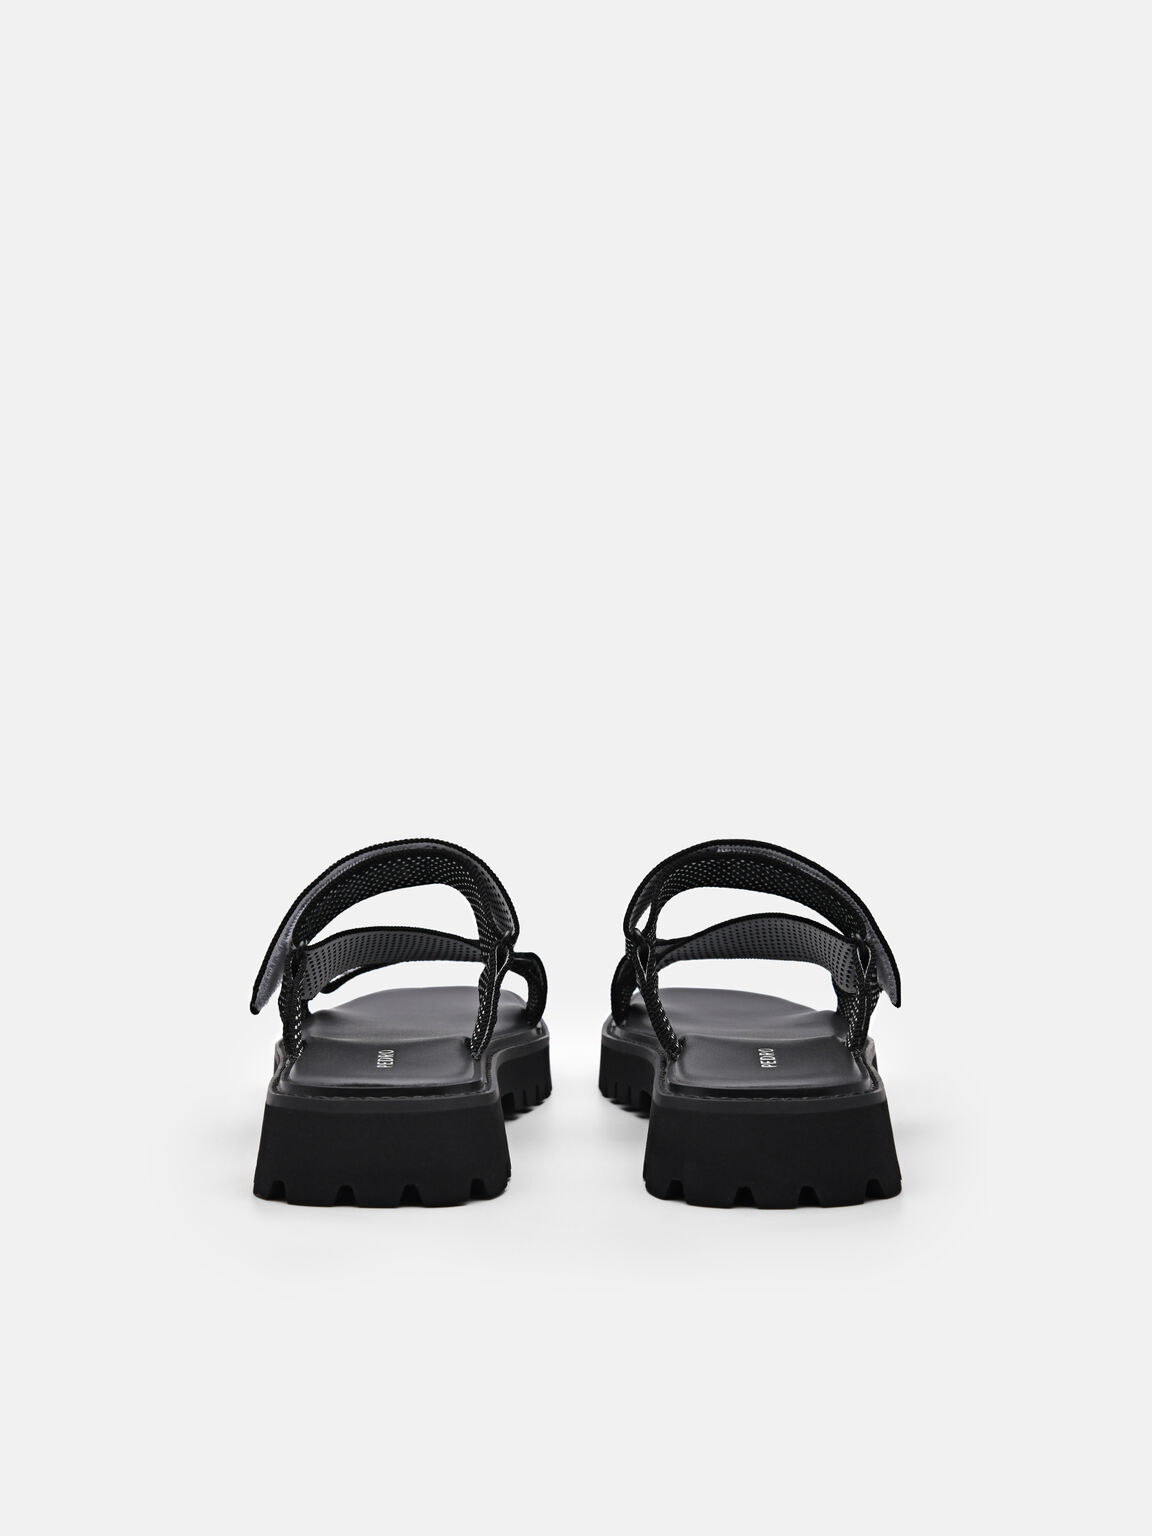 Ronni Knitted Sandals, Black, hi-res